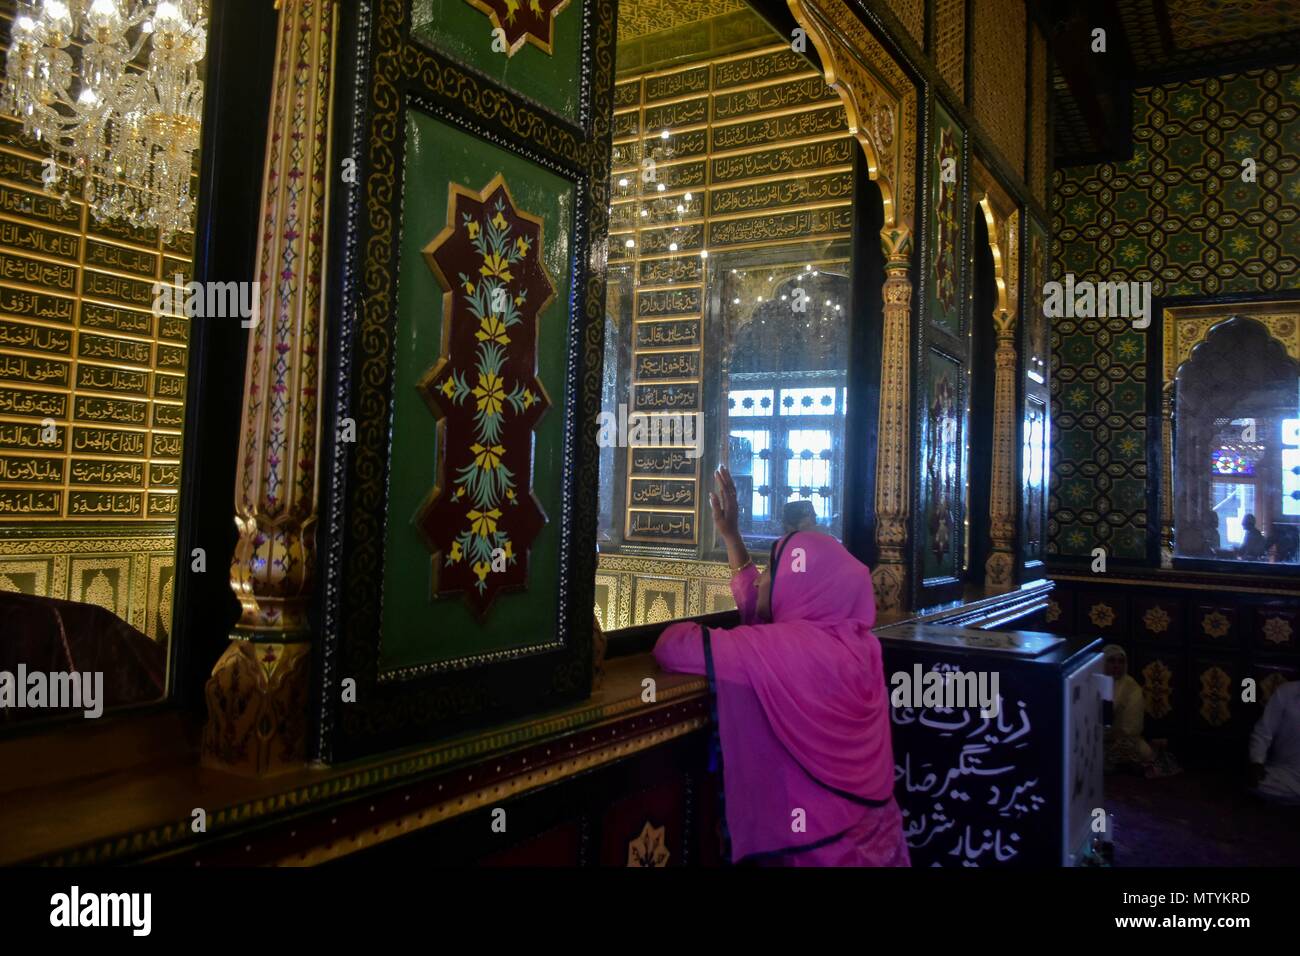 Srinagar, Kasmir. May 31, 2018 - Srinagar, J&K, - A Kashmiri woman prays inside the shrine of Syed Abdul Qadir Geelani during the ongoing holy month of Ramadan in Srinagar, Indian administered Kashmir. Muslims throughout the world are marking the month of Ramadan, the holiest month in the Islamic calendar during which devotees fast from dawn till dusk. Credit: Saqib Majeed/SOPA Images/ZUMA Wire/Alamy Live News Stock Photo